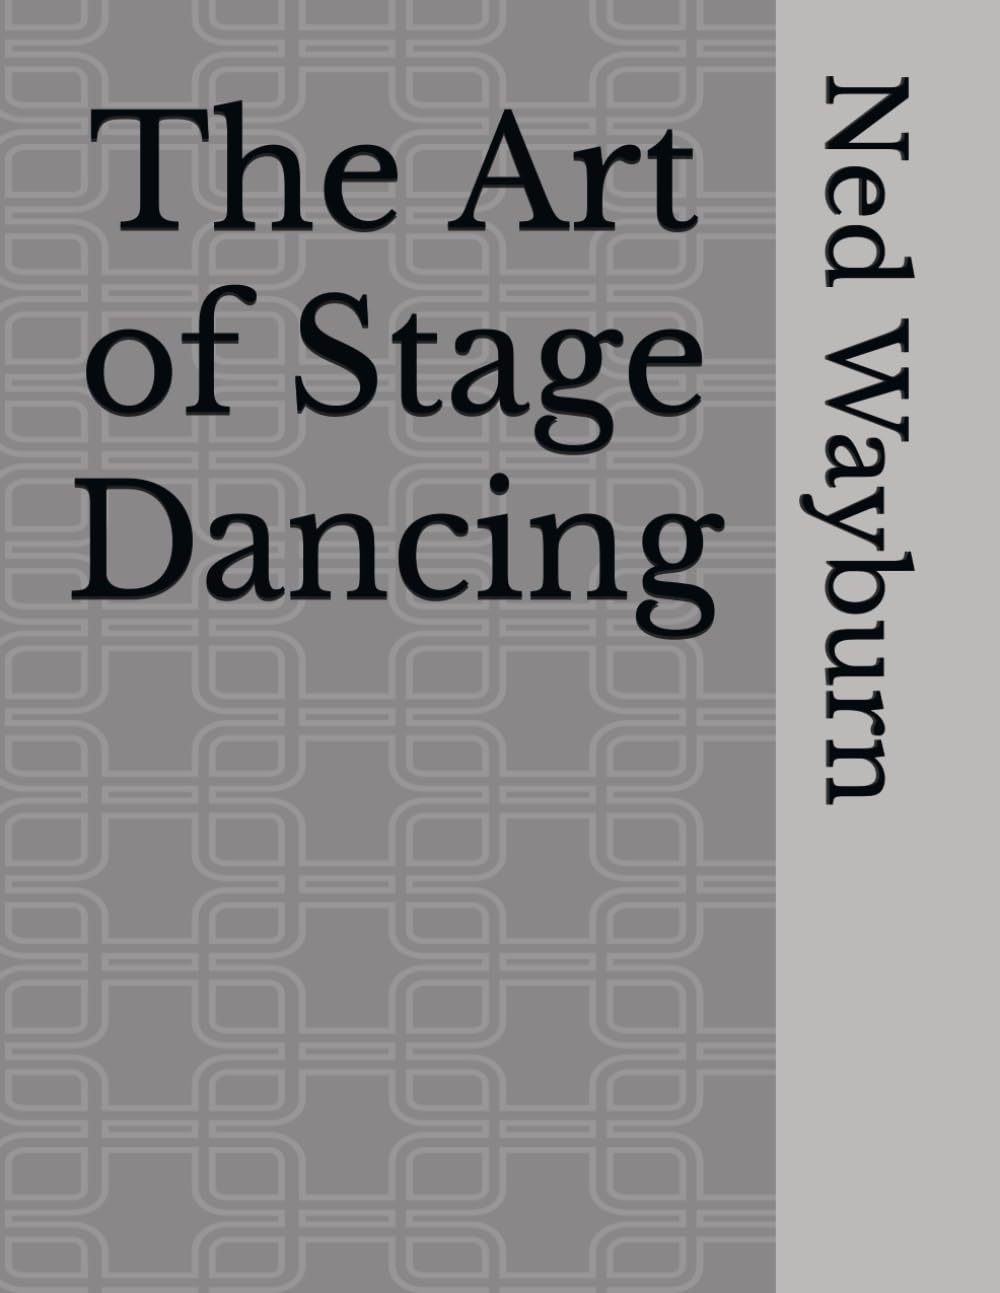 The art of stage dancing